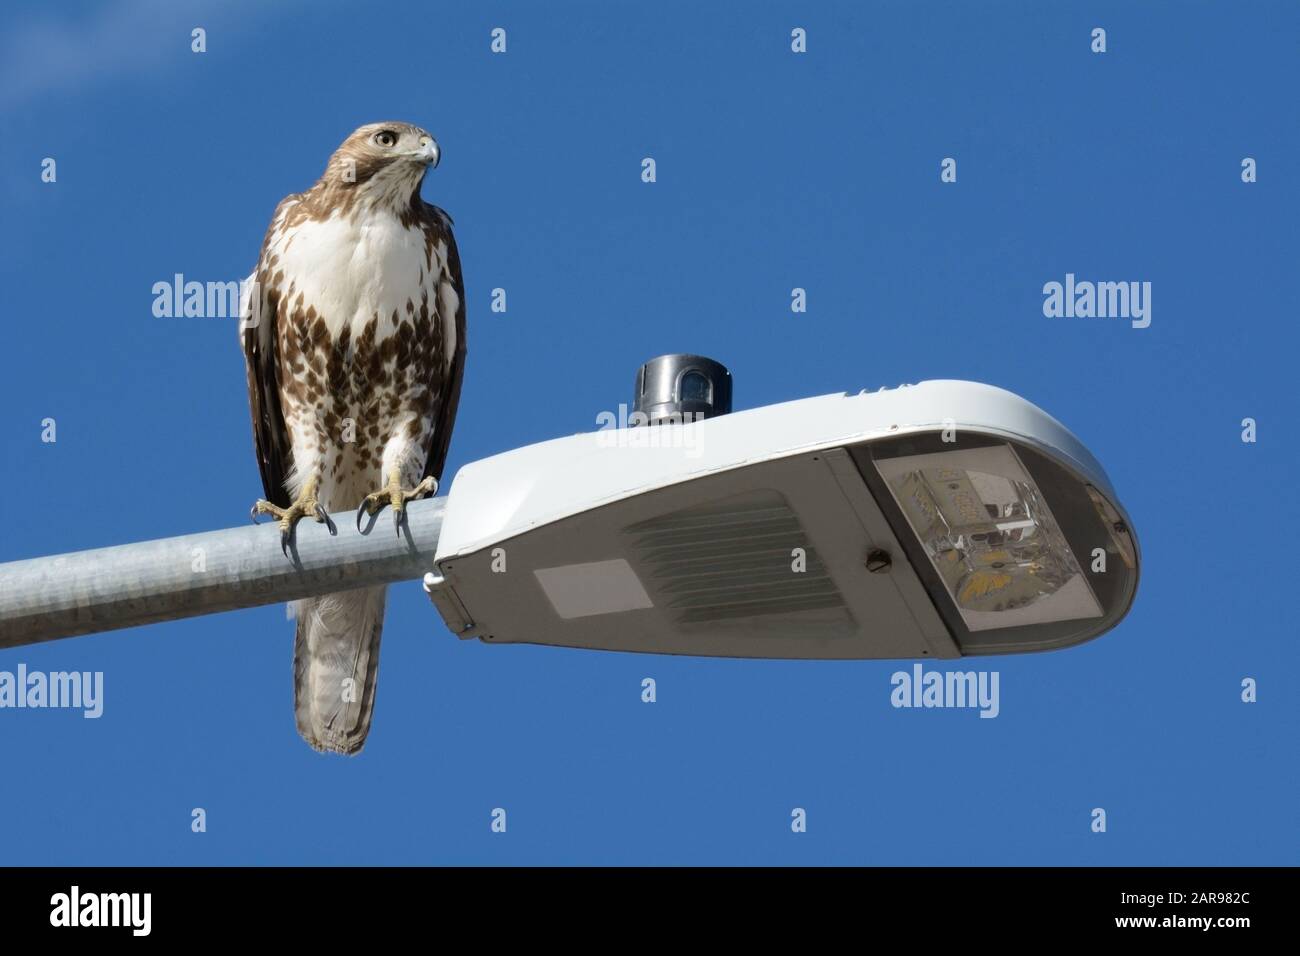 Urban wildlife of juvenile red tailed hawk or Buteo jamaicensis perched on lamp post looking over area for next meal Stock Photo